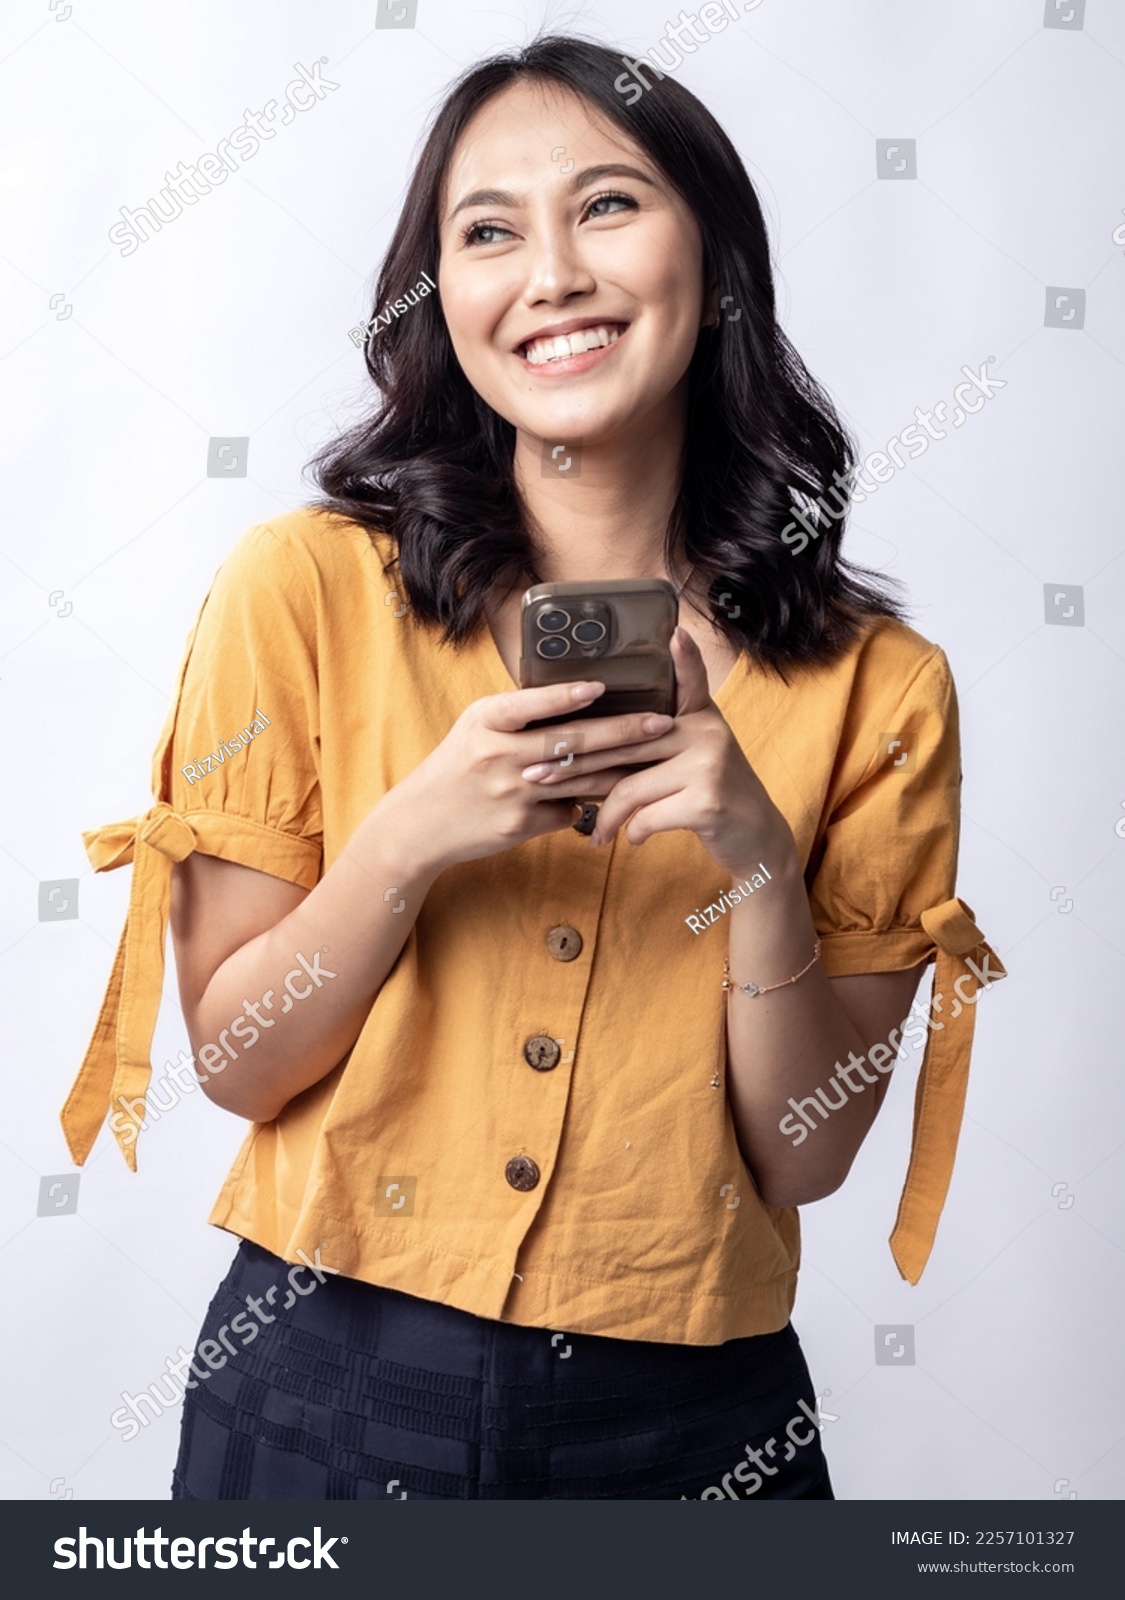 A studio portrait of a young beautiful Indonesian Asian woman in a casual yellow shirt looks happy while typing on her phone.  isolated on white background #2257101327